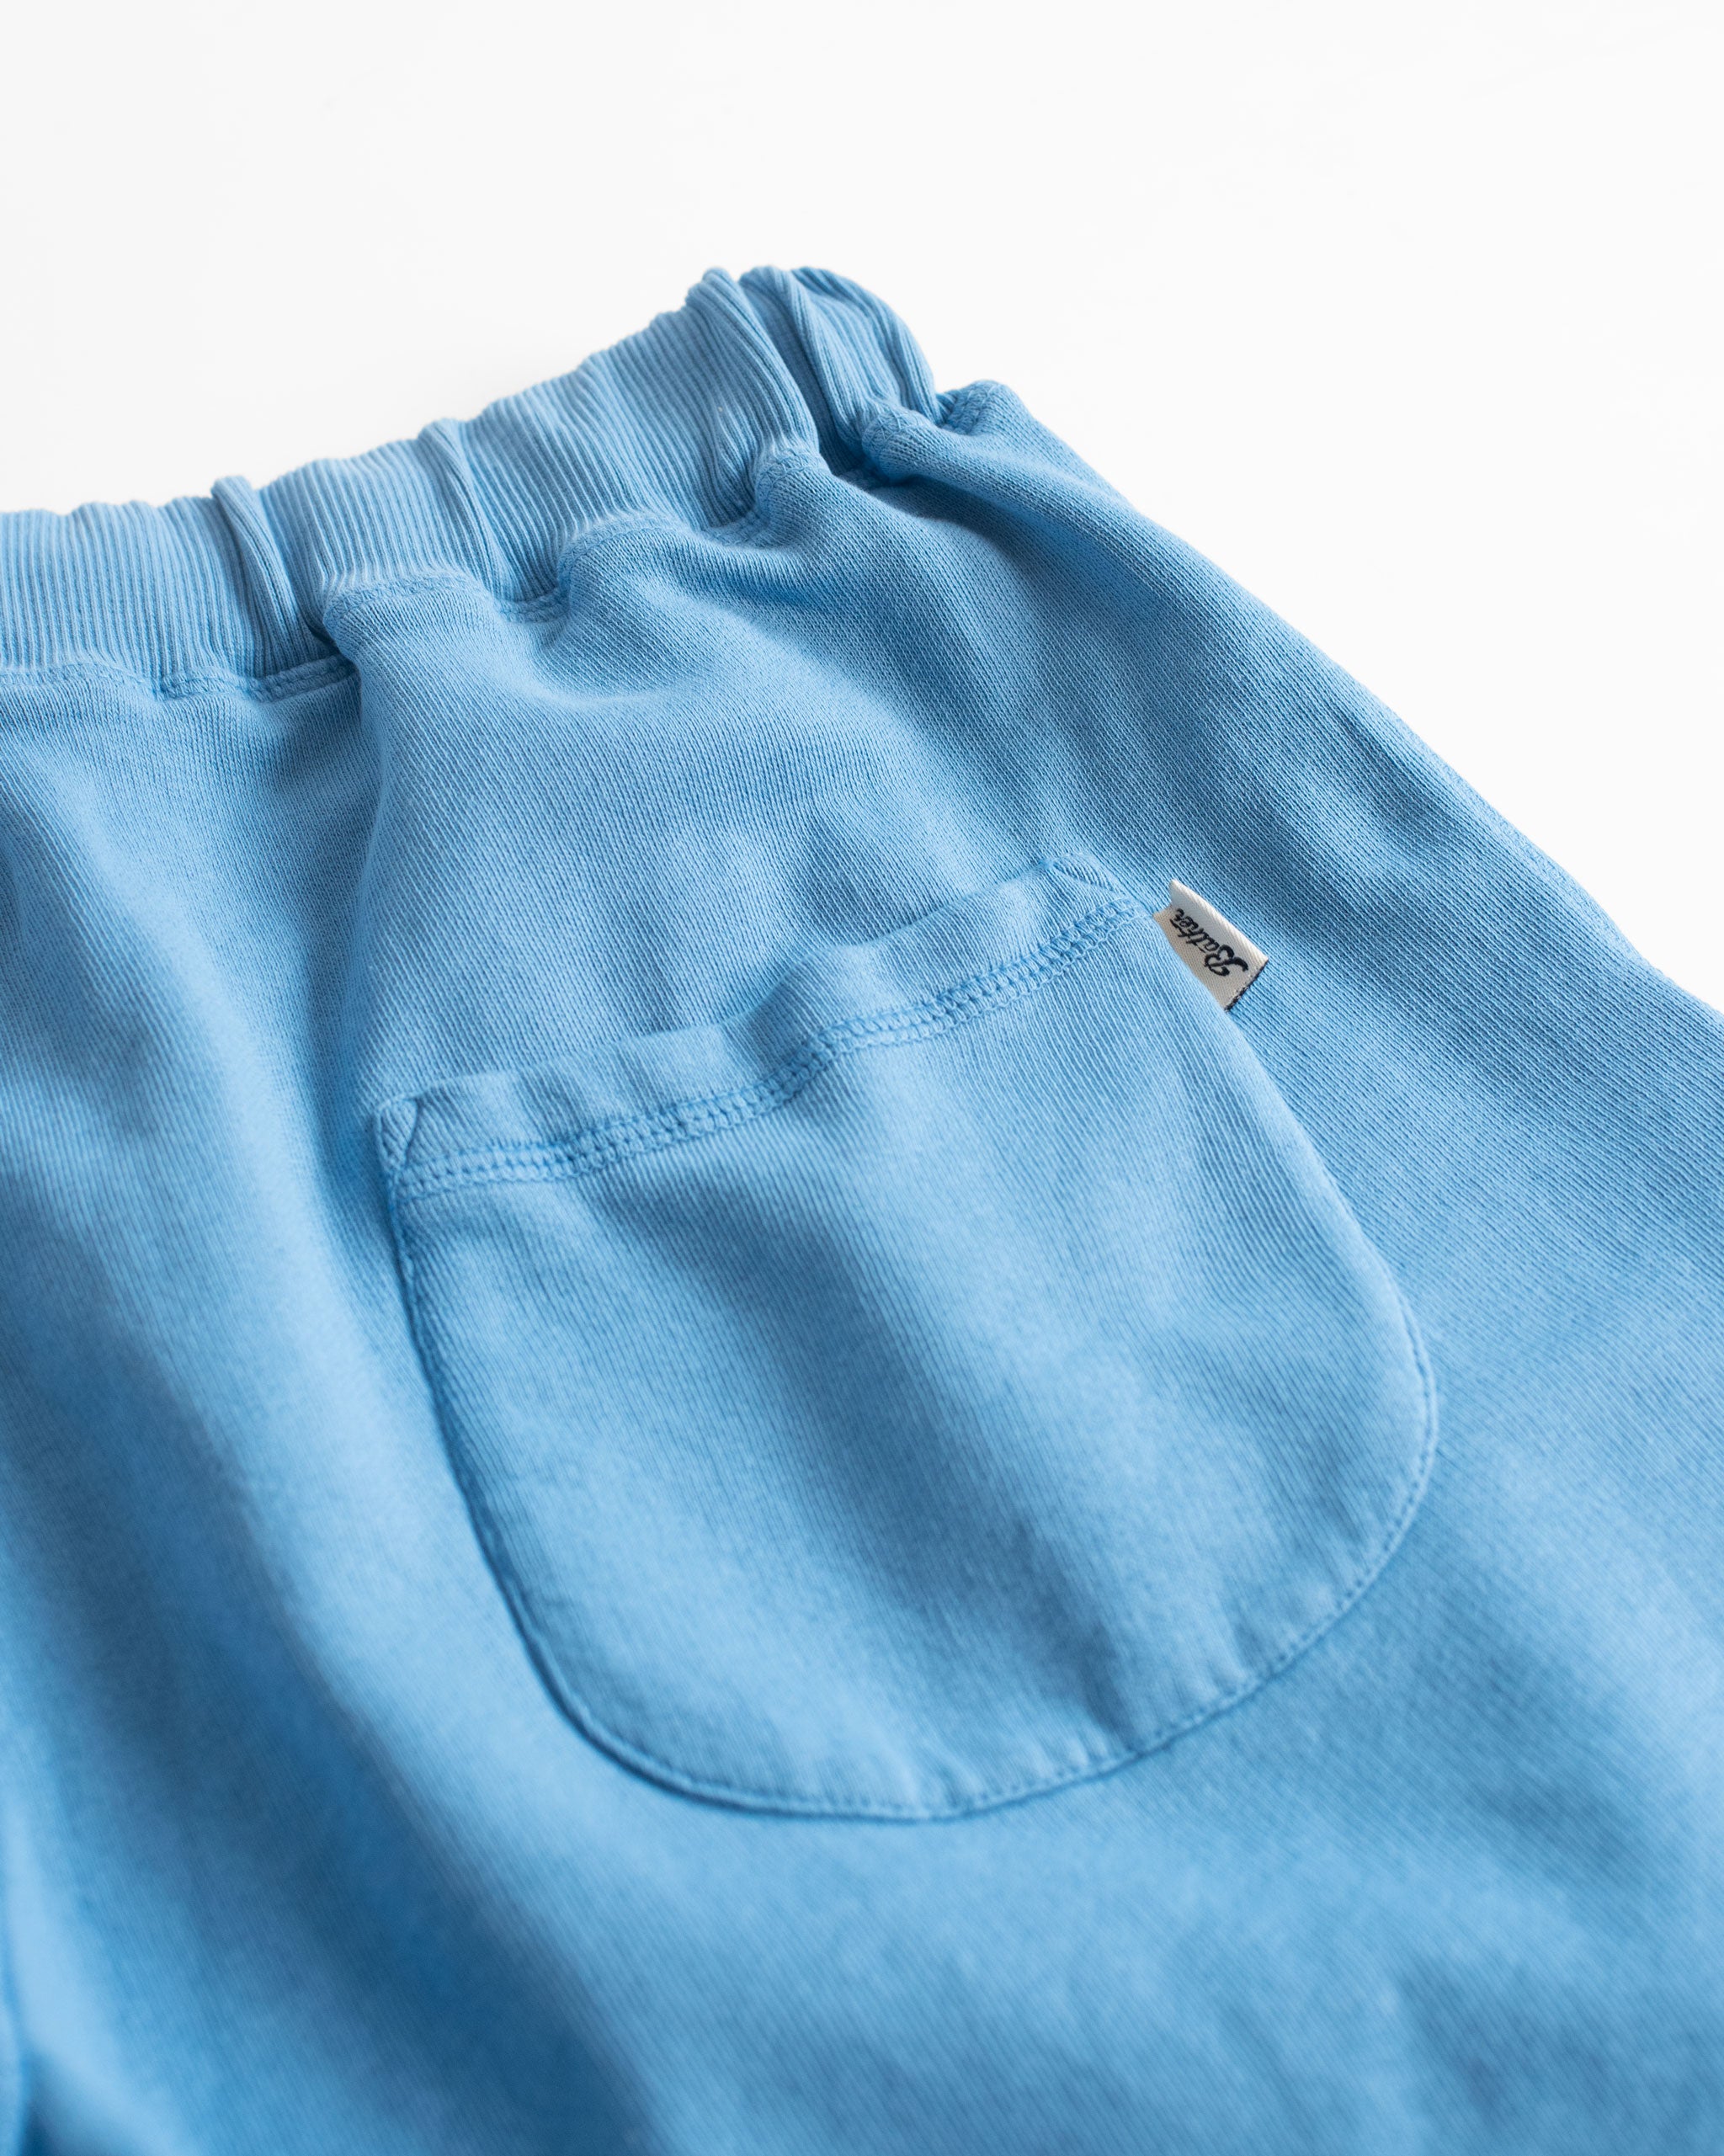 back pocket shot of Solid Blue French Terry Cotton Sweat Shorts